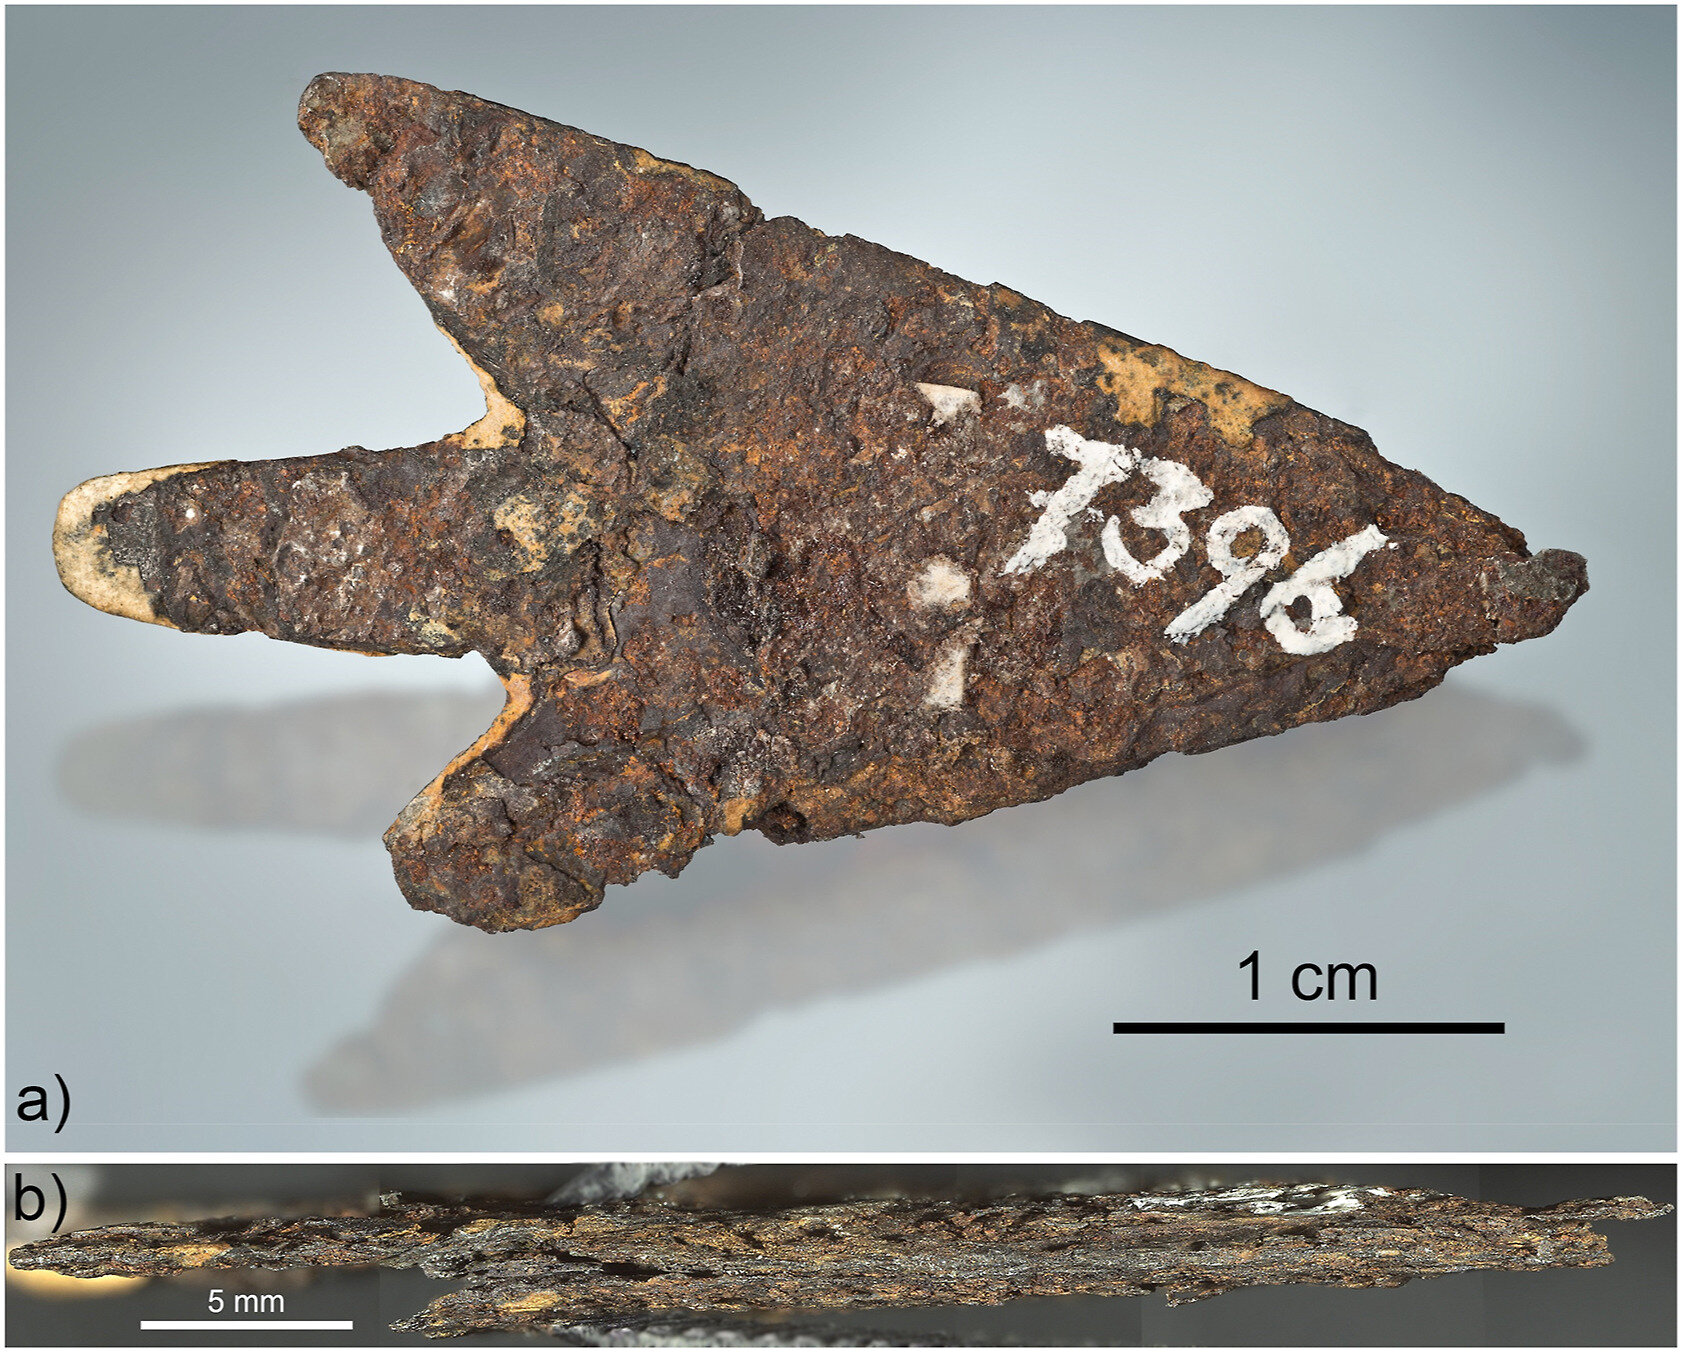 Bronze Age arrow 'speaks' 150 years after discovery: it came from outer space